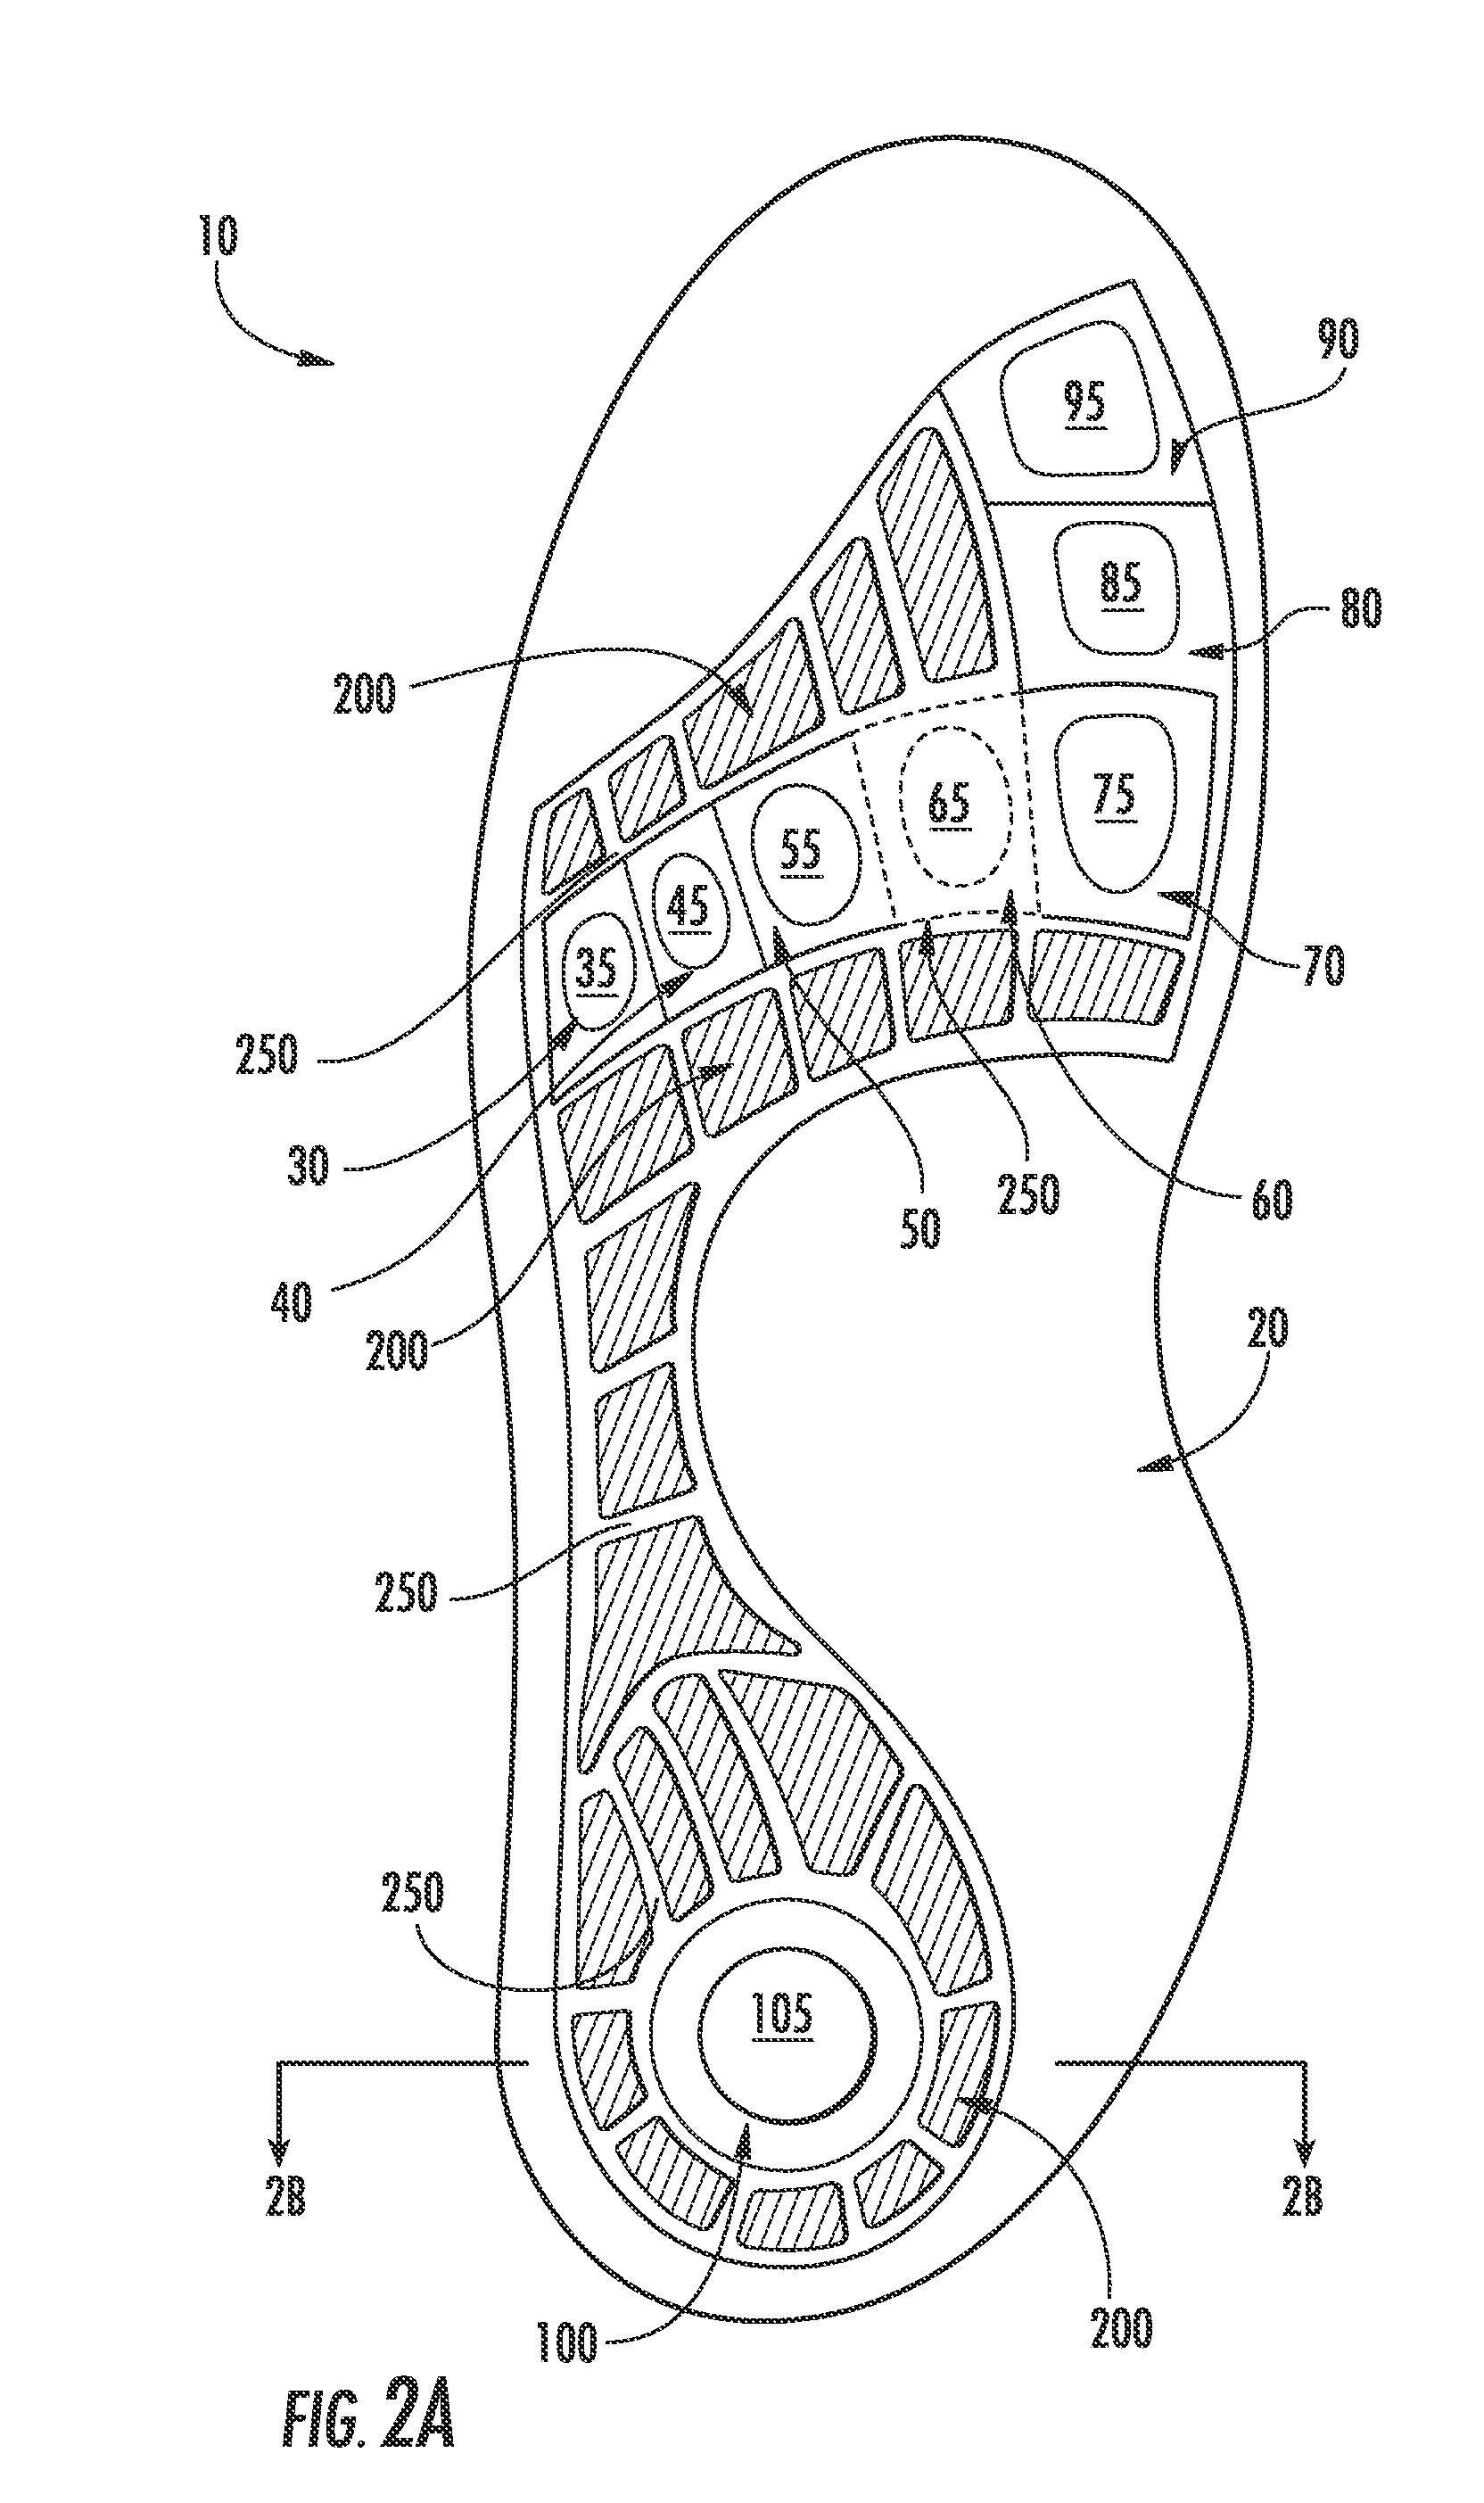 Shoe sole inserts for pressure distribution